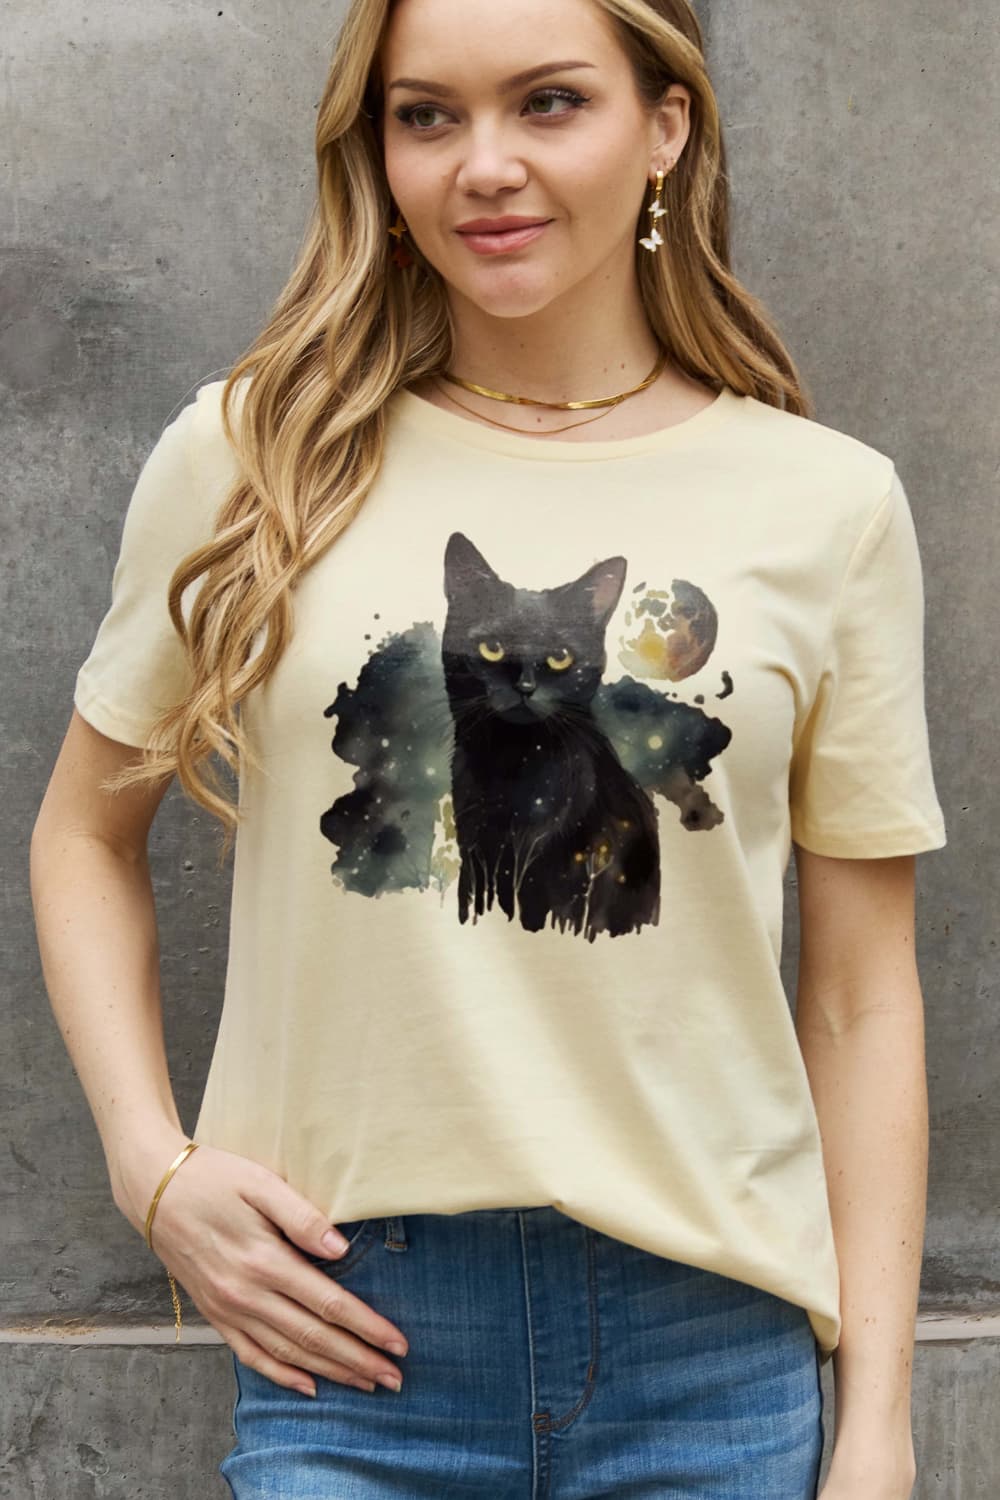 Simply Love Full Size Black Cat Graphic Cotton Tee